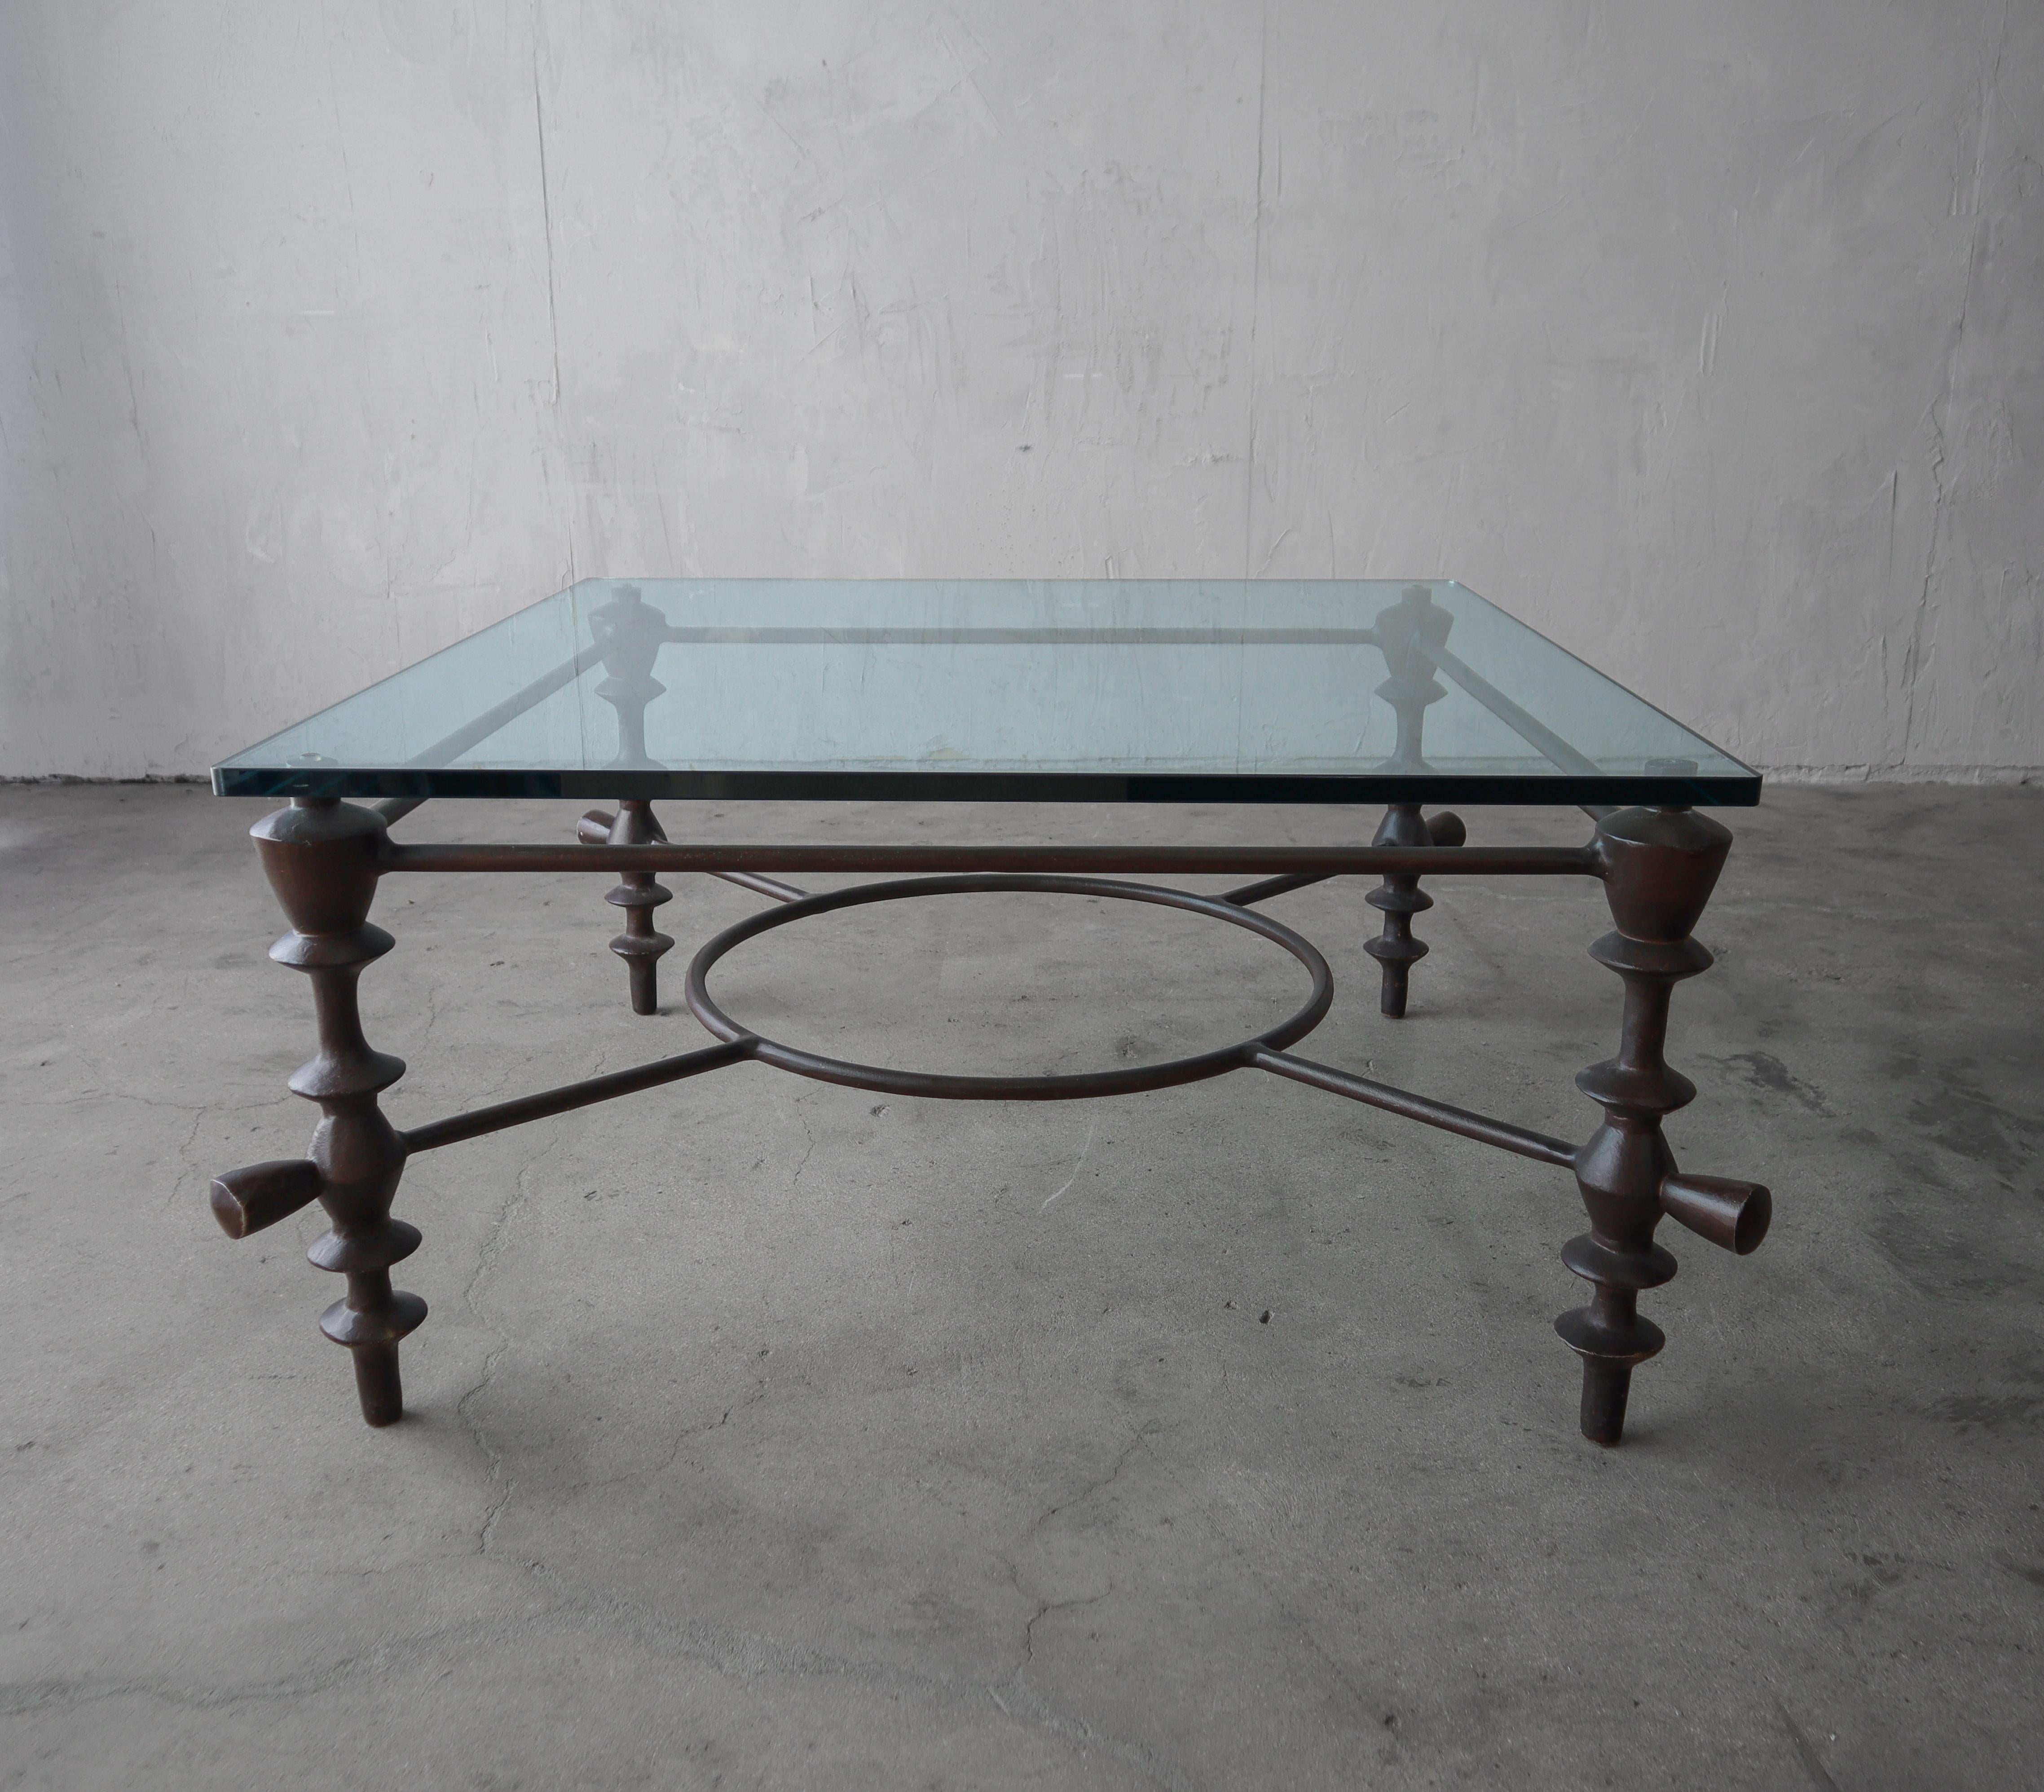 Substantial and gorgeous sculptural coffee table in the style of Diego Giacometti. Table base is cast aluminum with a bronze finish and beautiful glass top.
 
 A very clean, minimal design, perfect for many design aesthetics.

Balance of table is in